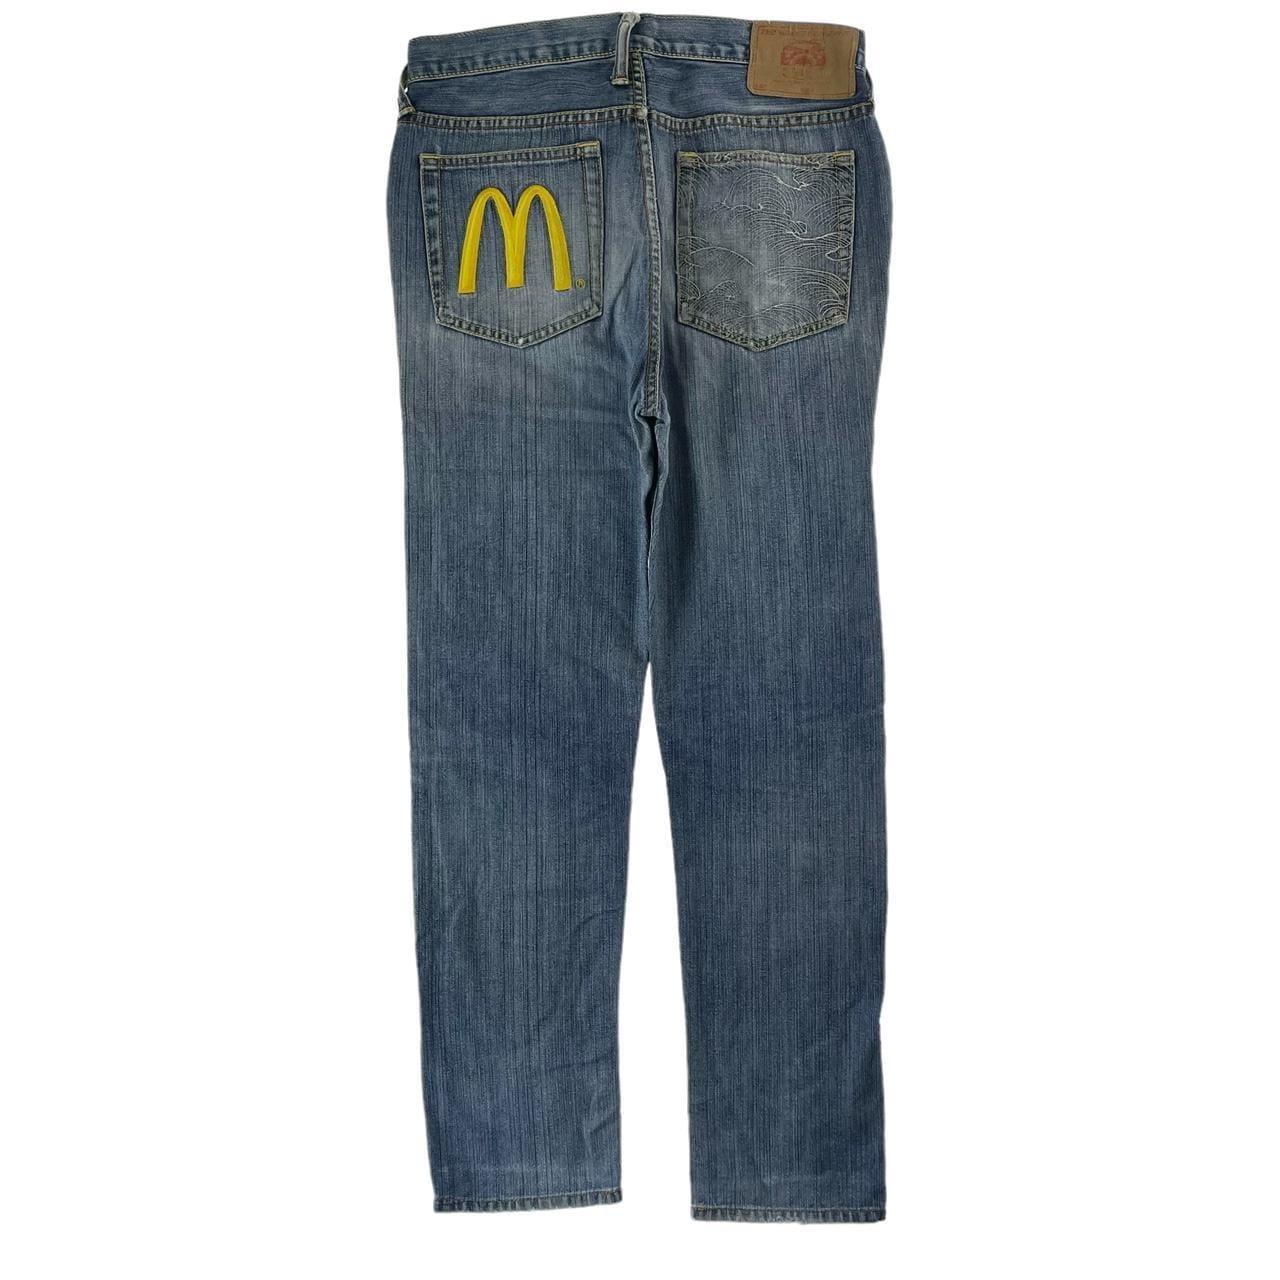 Vintage RMC Red Monkey Company McDonald’s Japanese denim jeans trousers W29 - Known Source